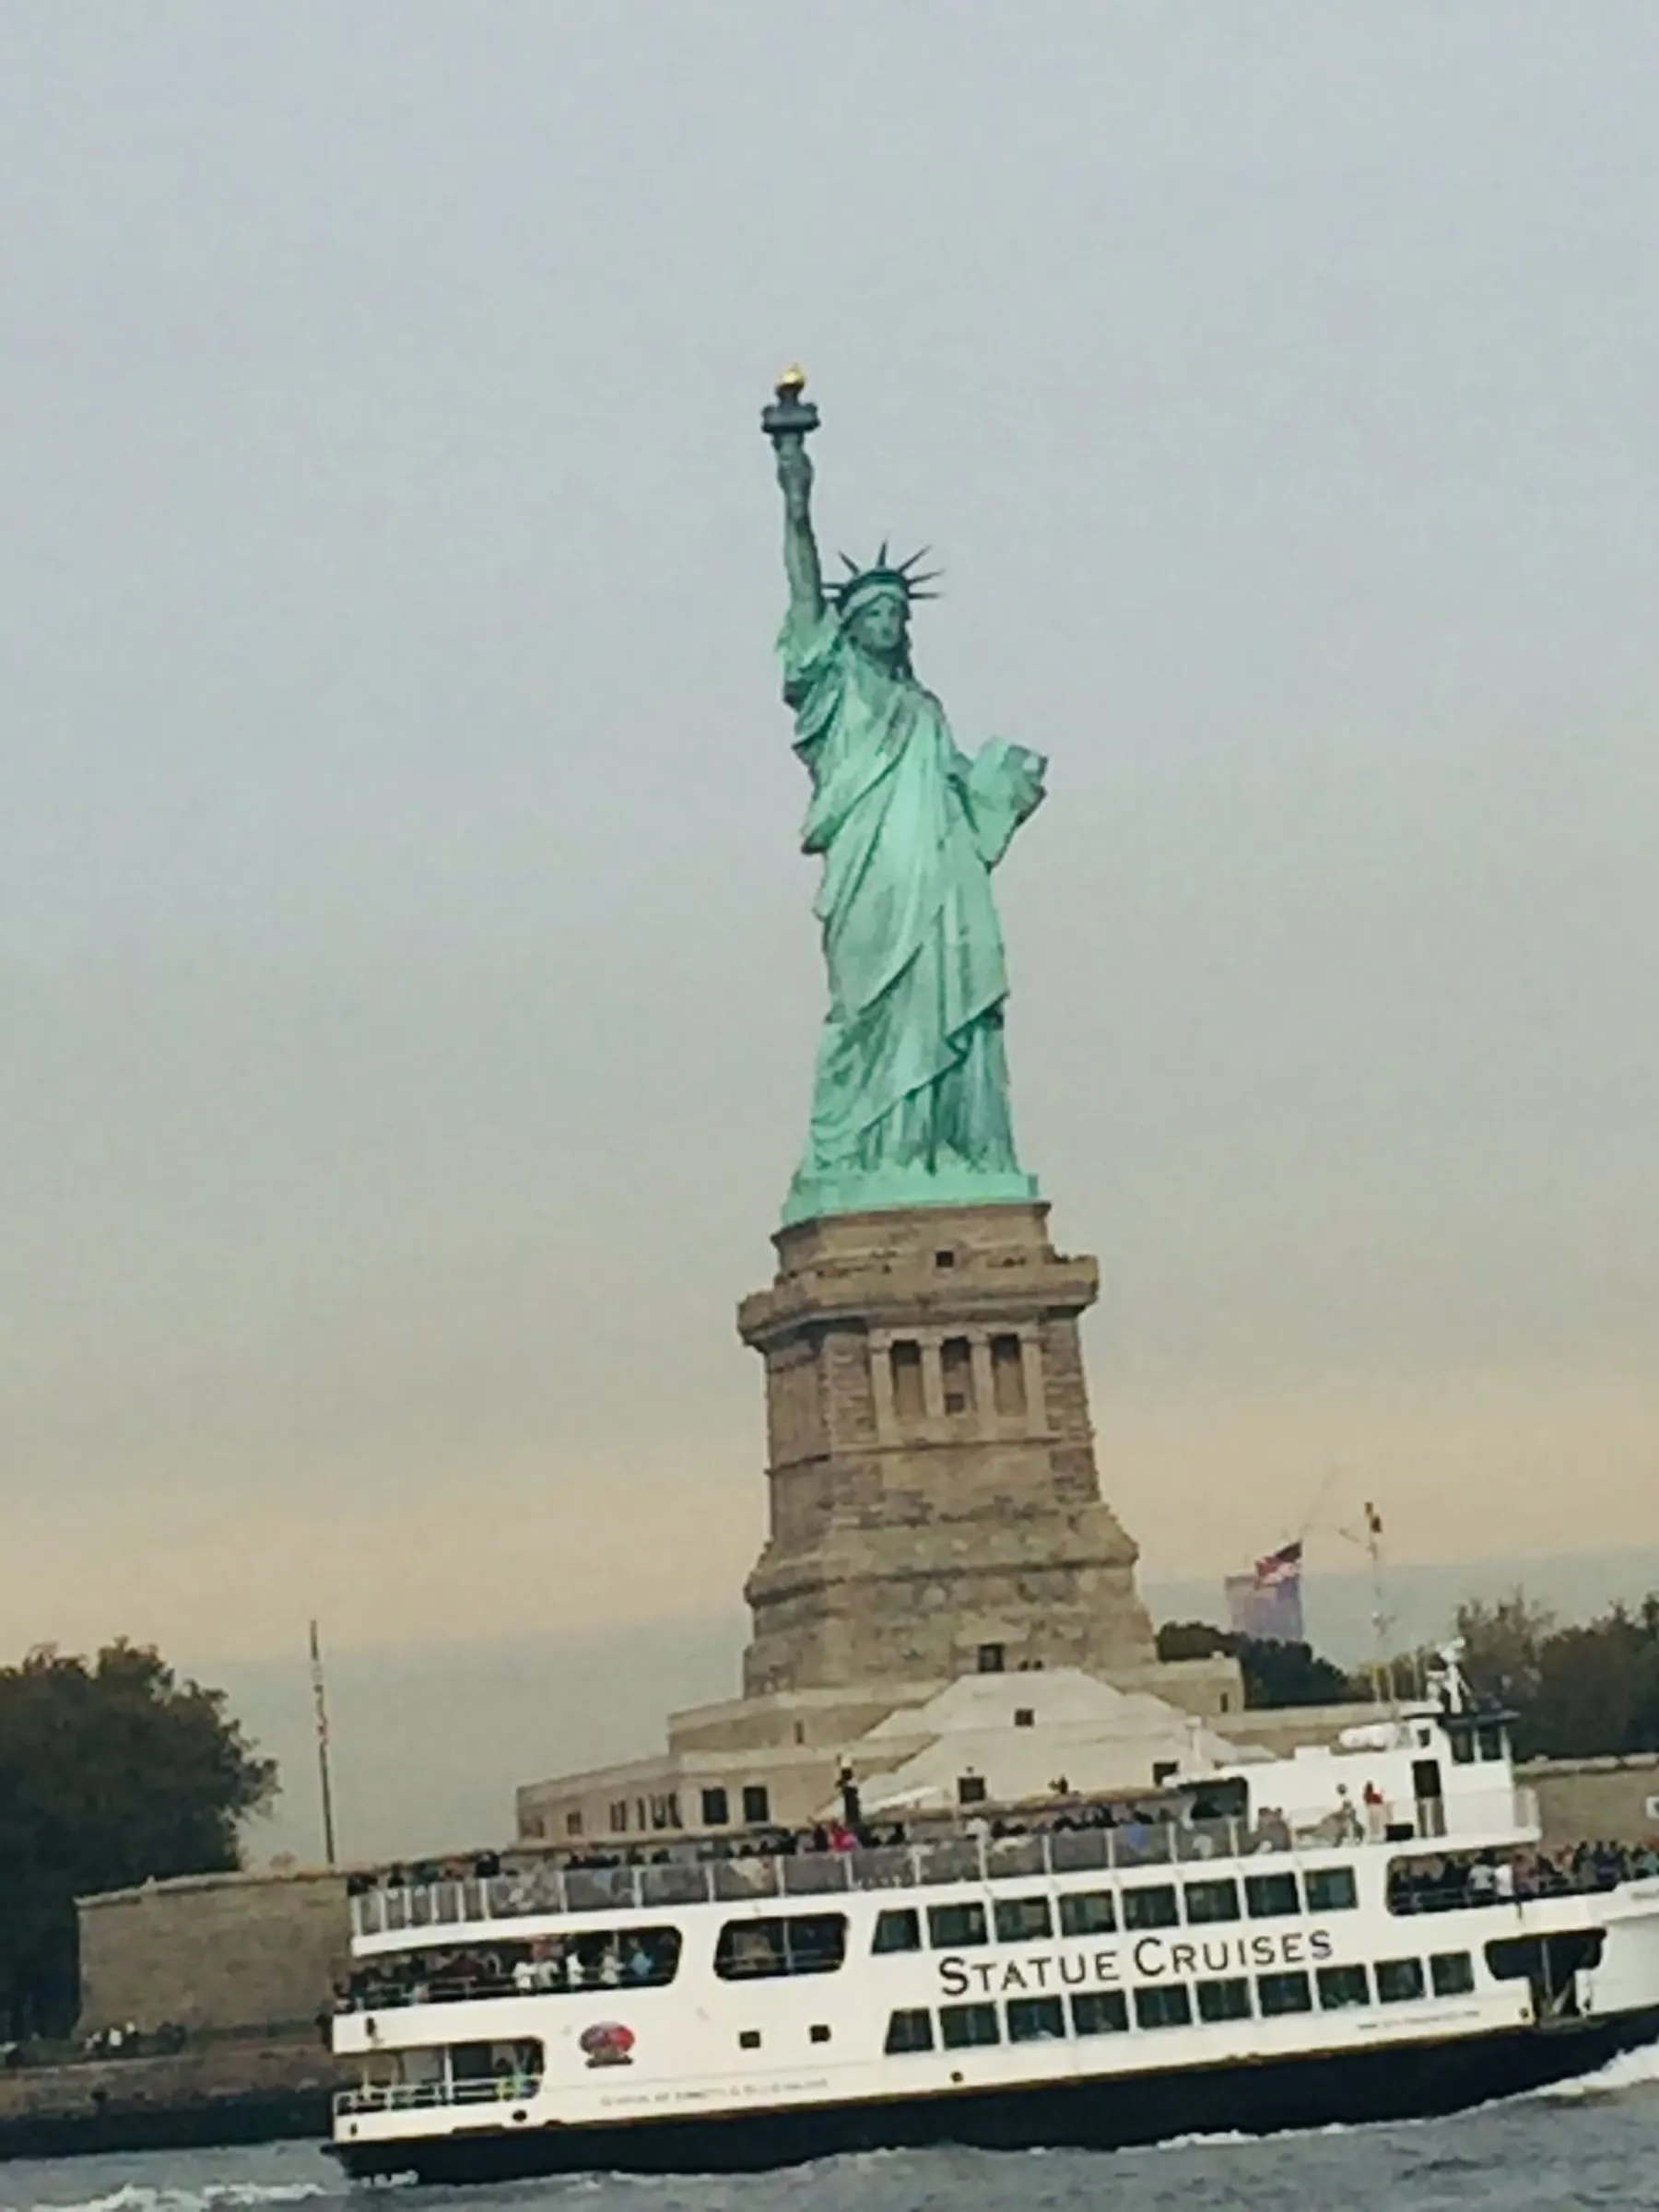 The image shows the iconic Statue of Liberty with a 'Statue Cruises' ferry passing by in the foreground.